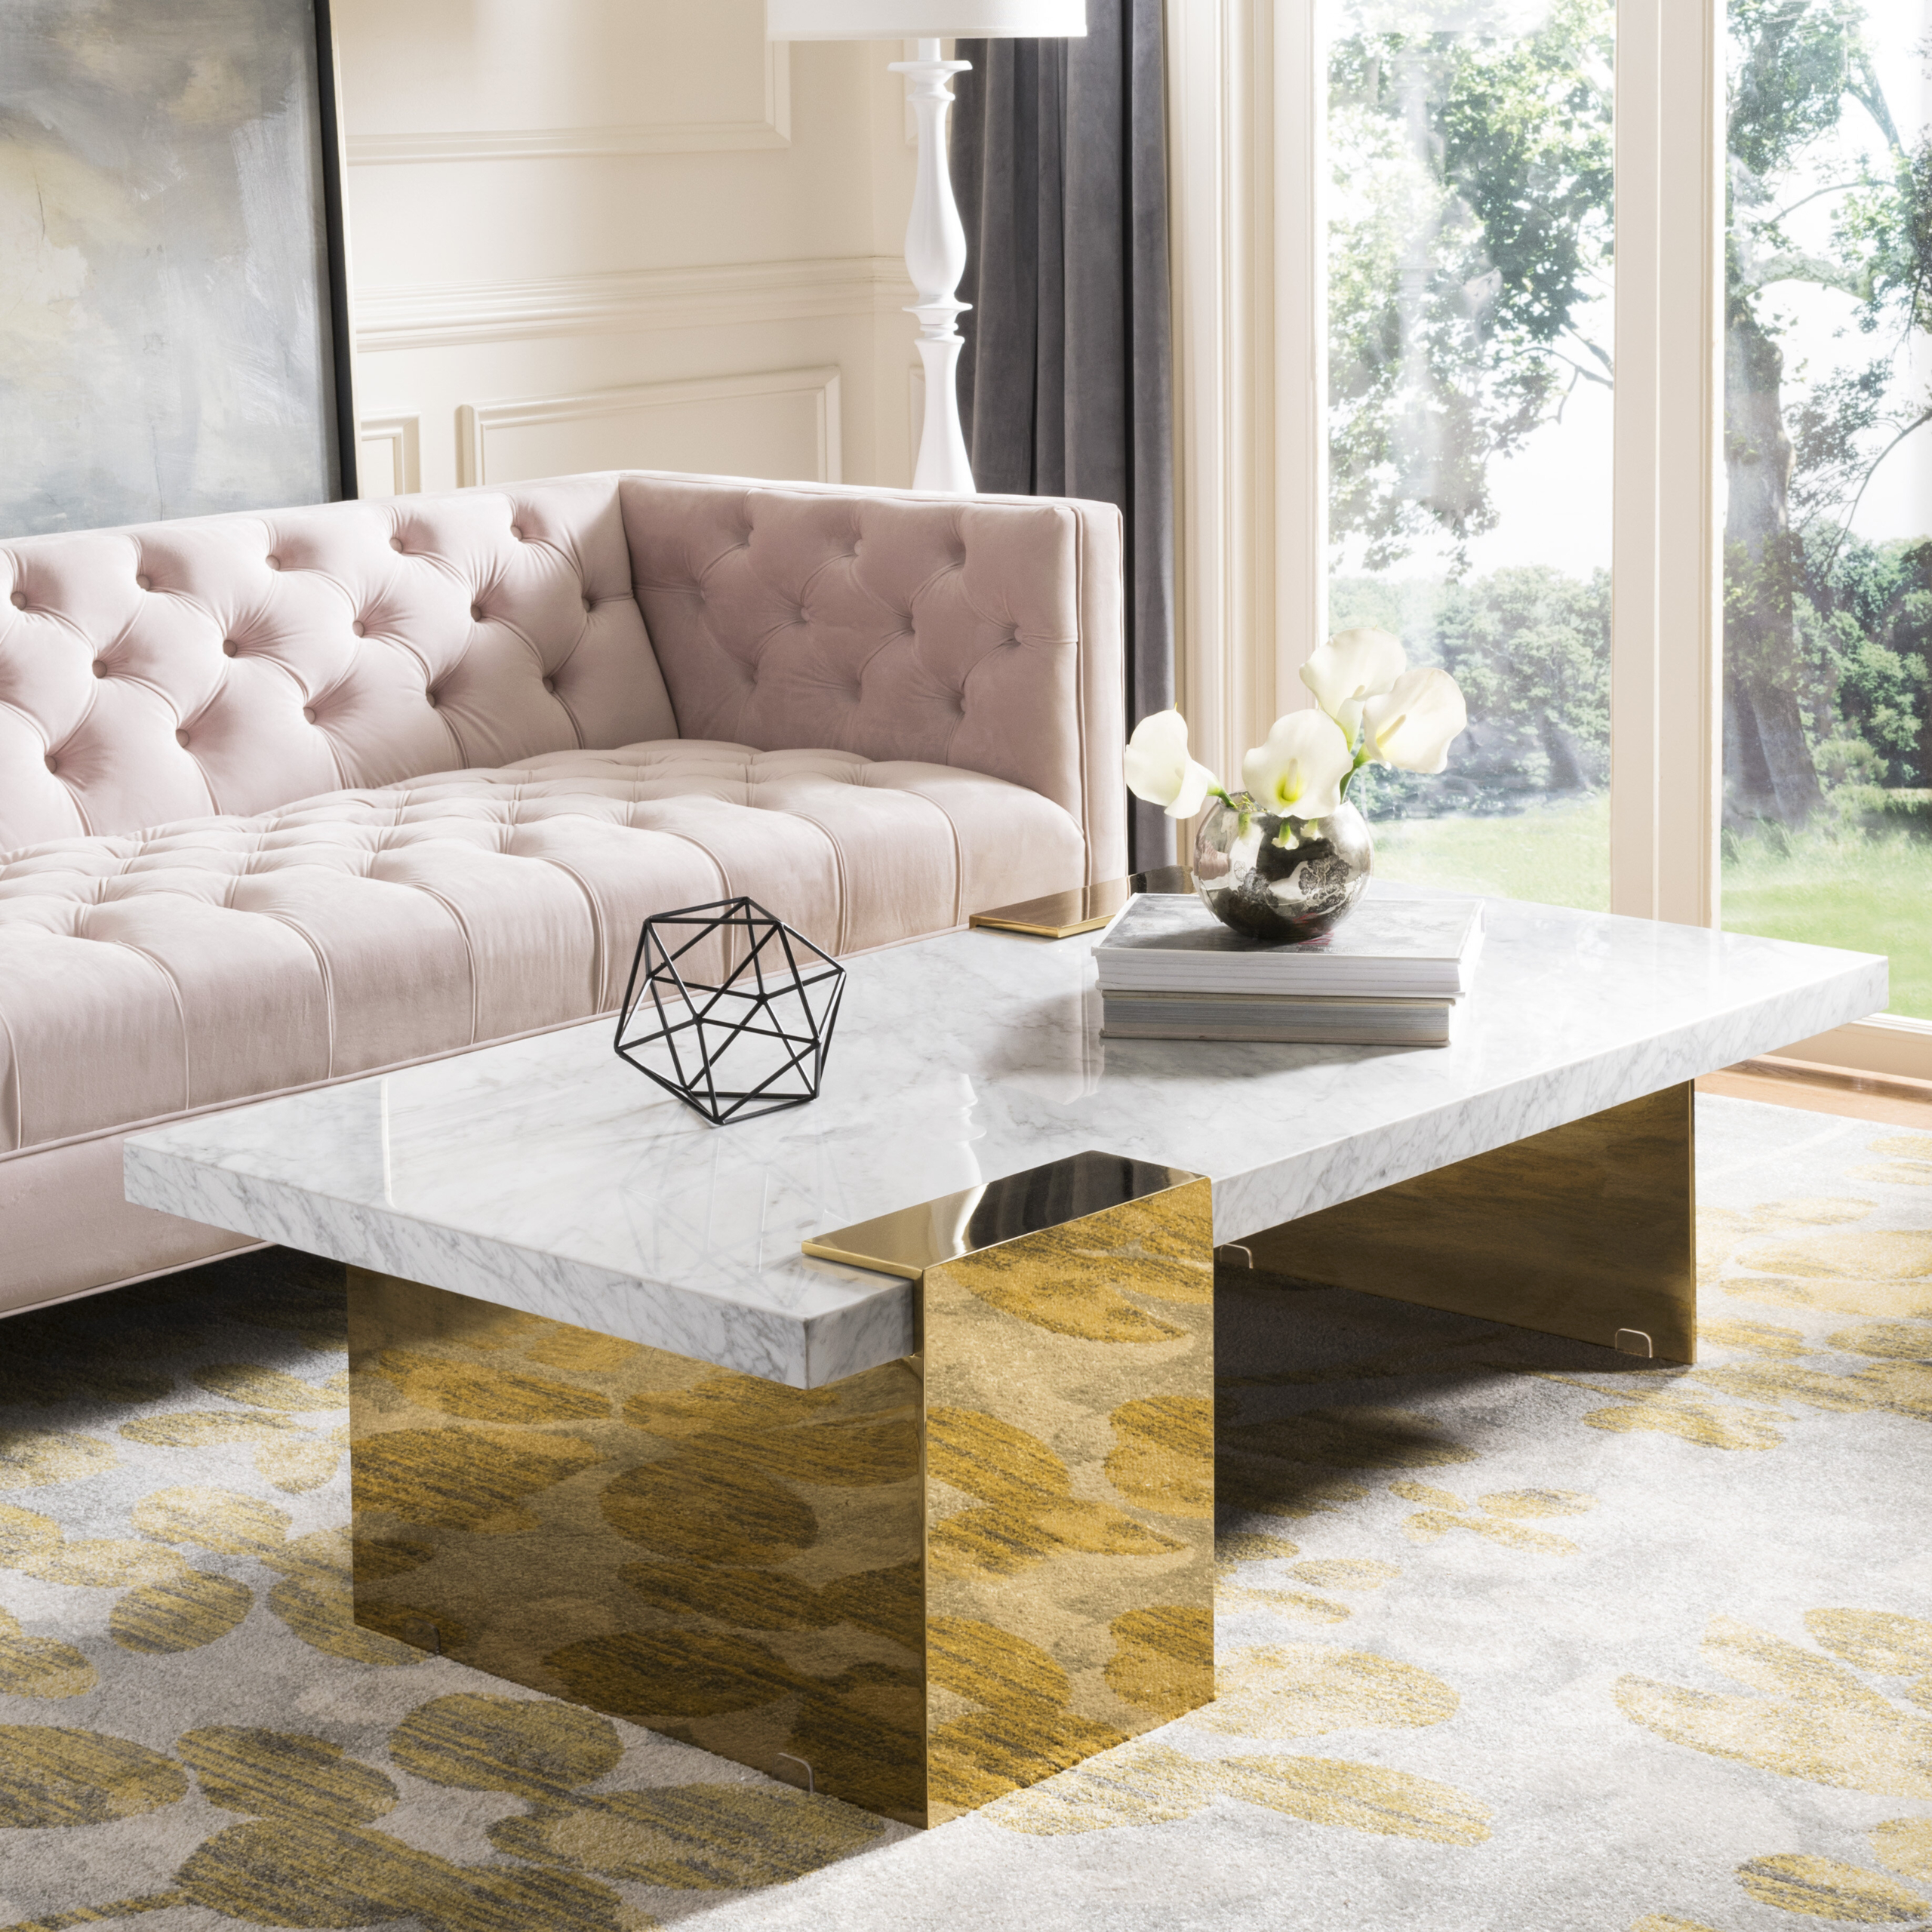 40.5 x 79 x 79 cm Kandla Grey Large Round Marble Coffee Table for Living Room with Gold Metal Legs Roseland Furniture Unique Contemporary Stylish Chic Sofa Table 